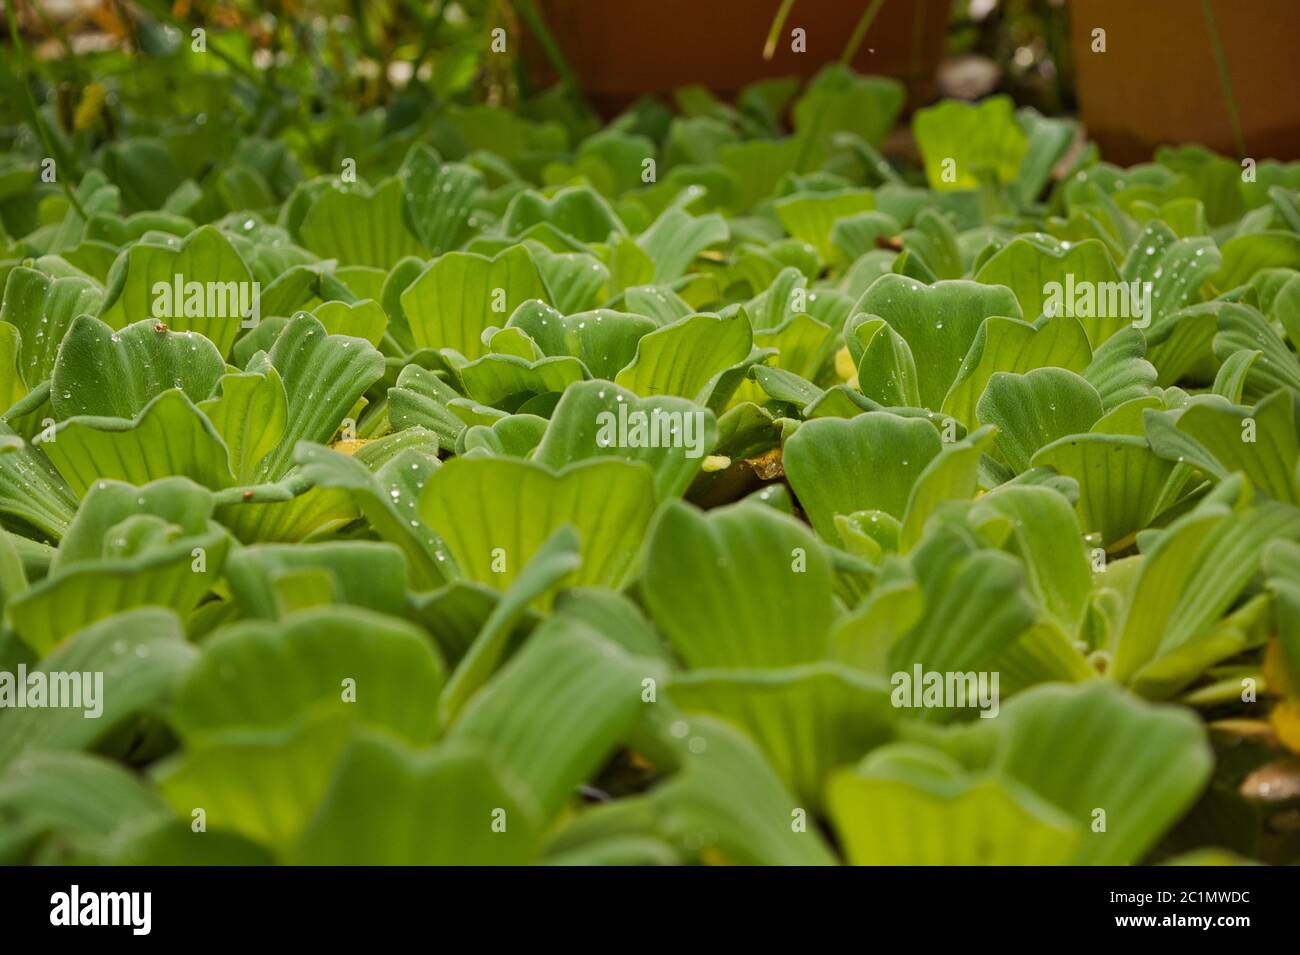 Nature background of succulent plants Stock Photo